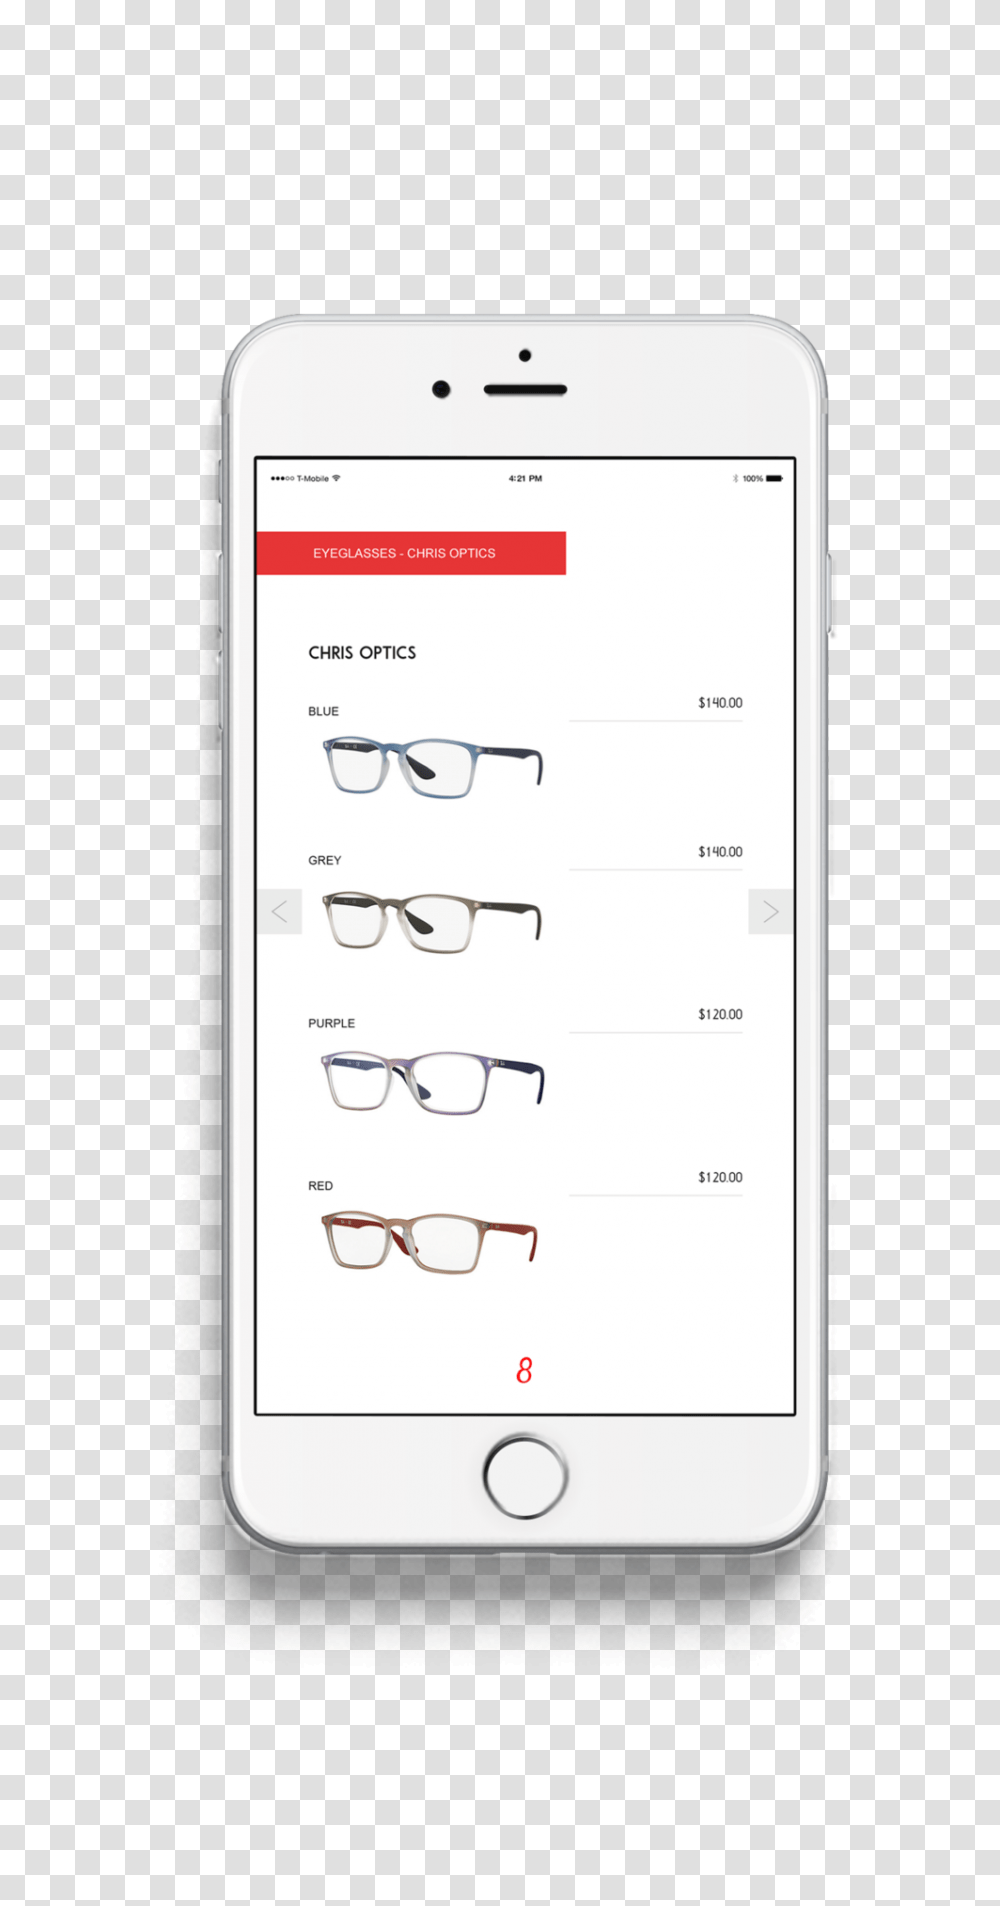 Download Iphone Mockup Image With No Background Pngkeycom Glasses, Mobile Phone, Electronics, Cell Phone, Accessories Transparent Png